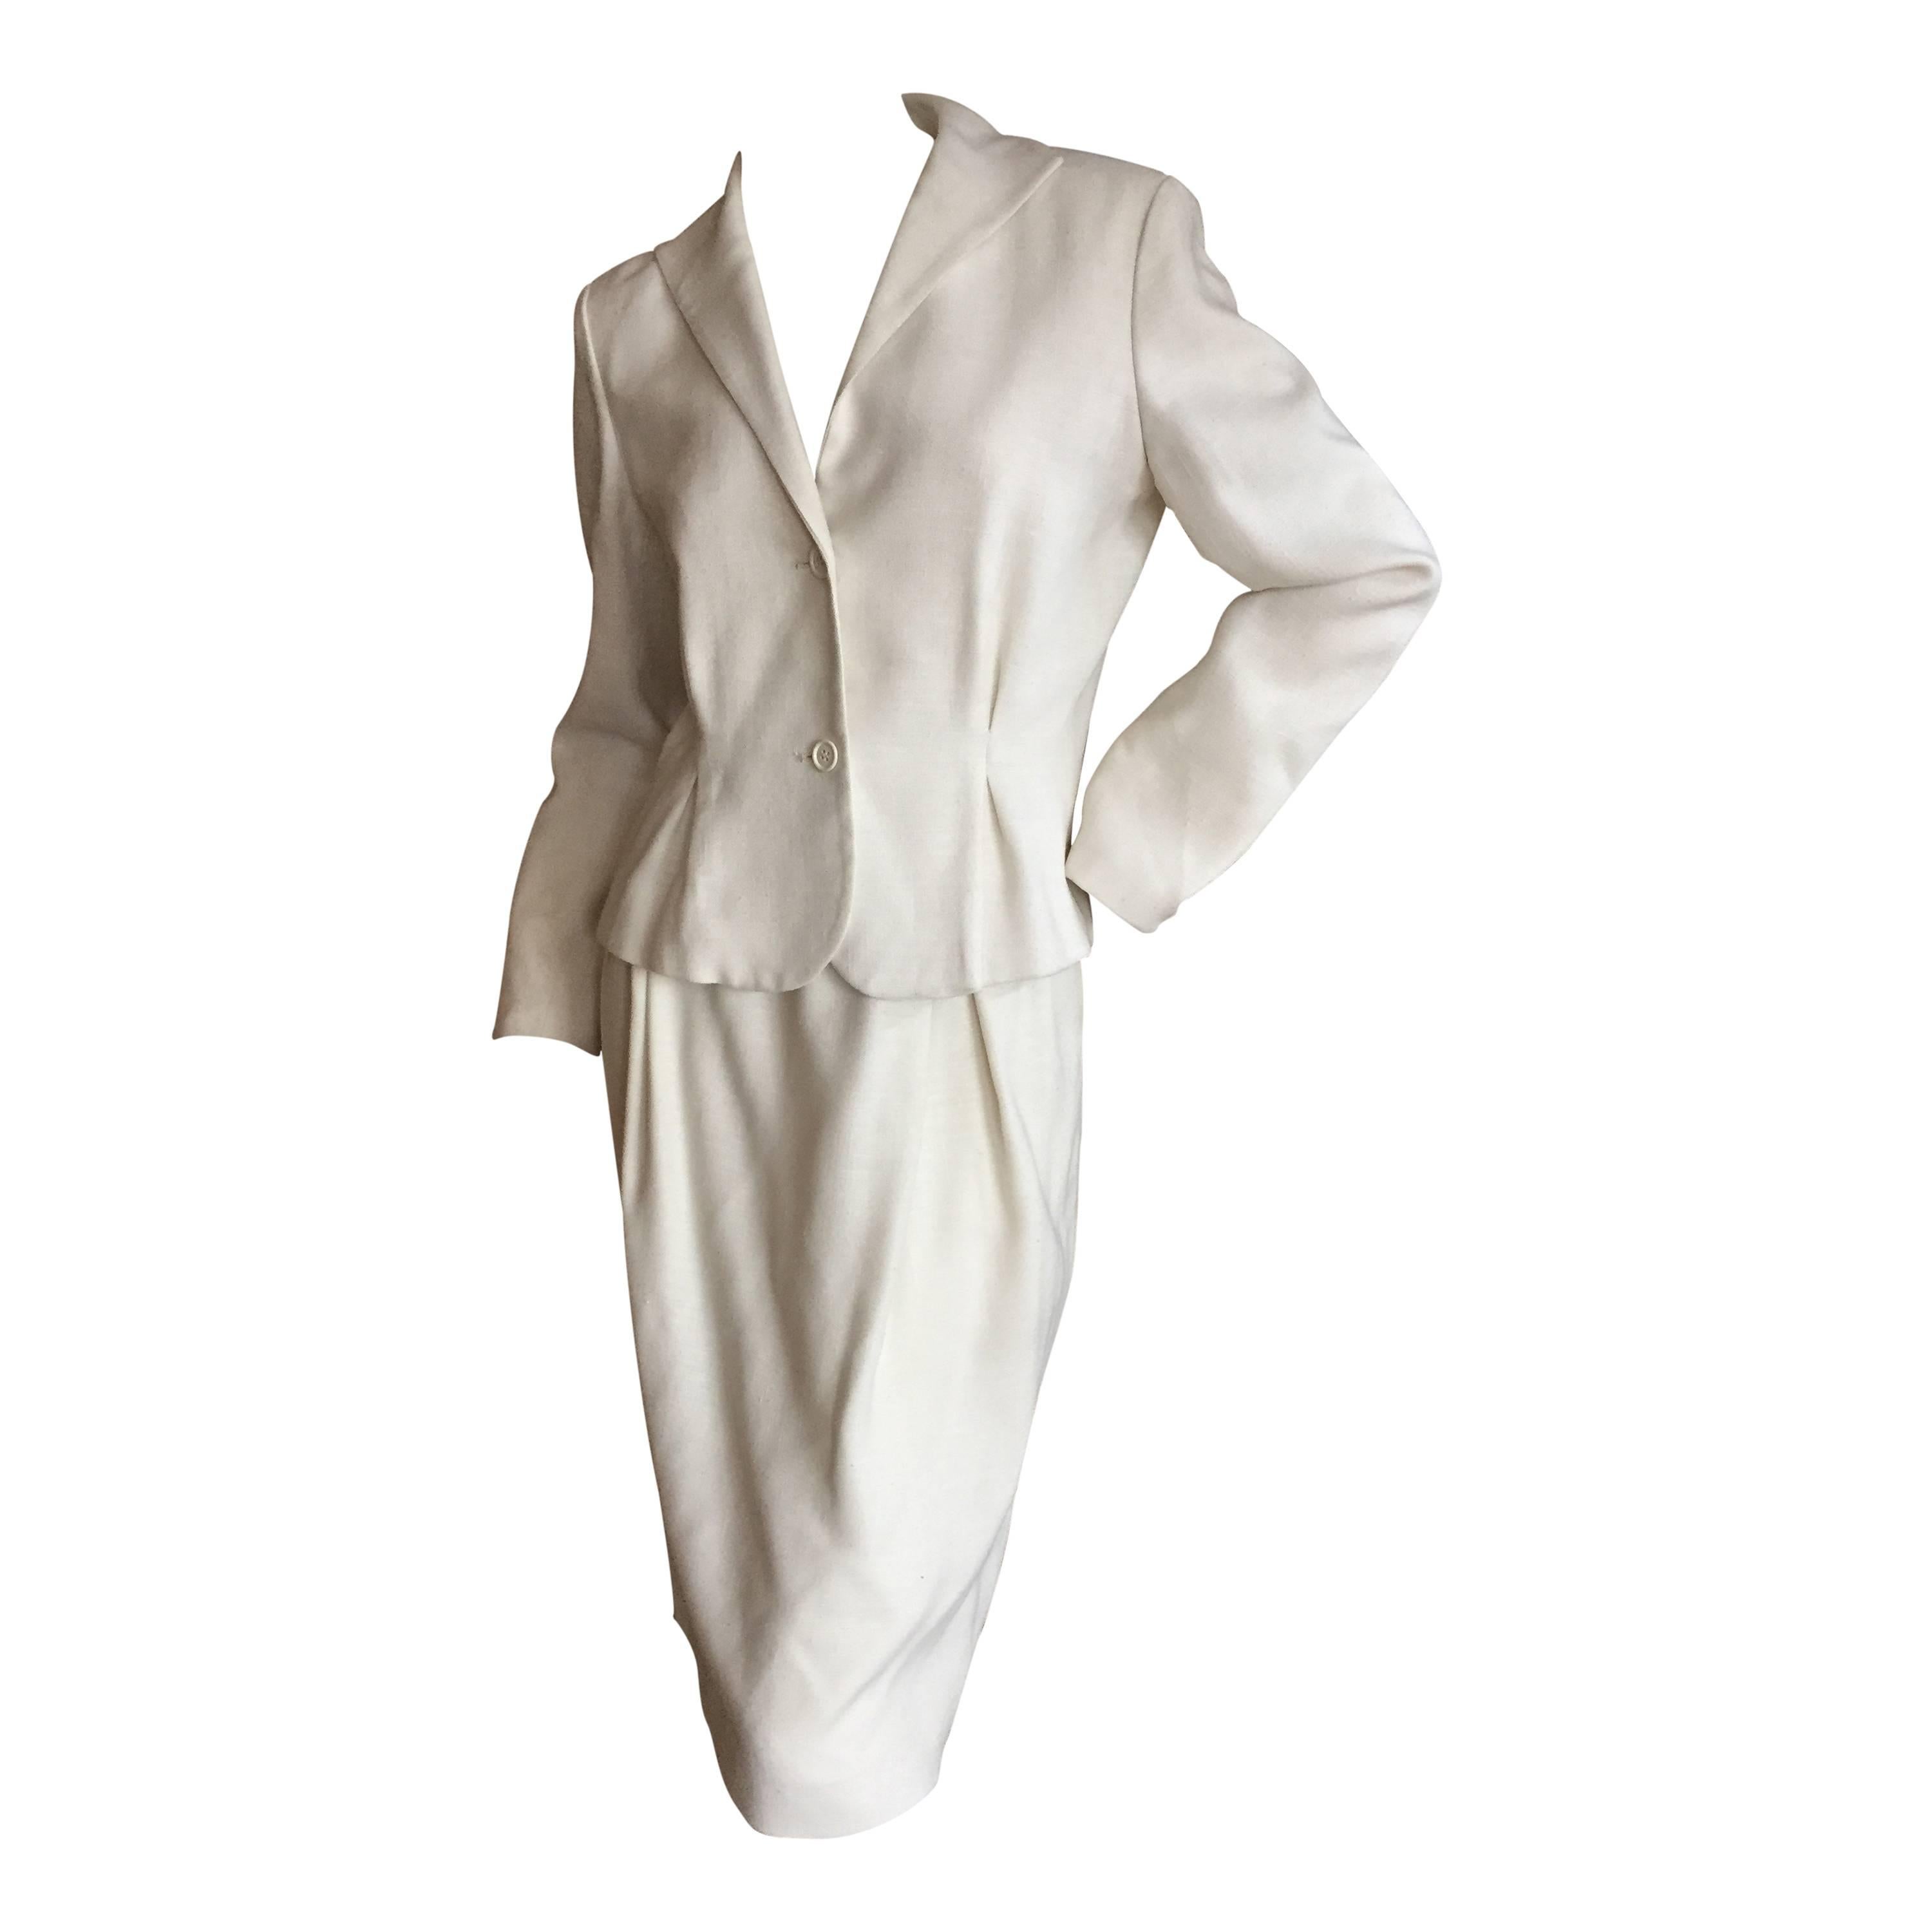 Halston 1970's Ivory Linen Skirt Suit from I.Magnin For Sale